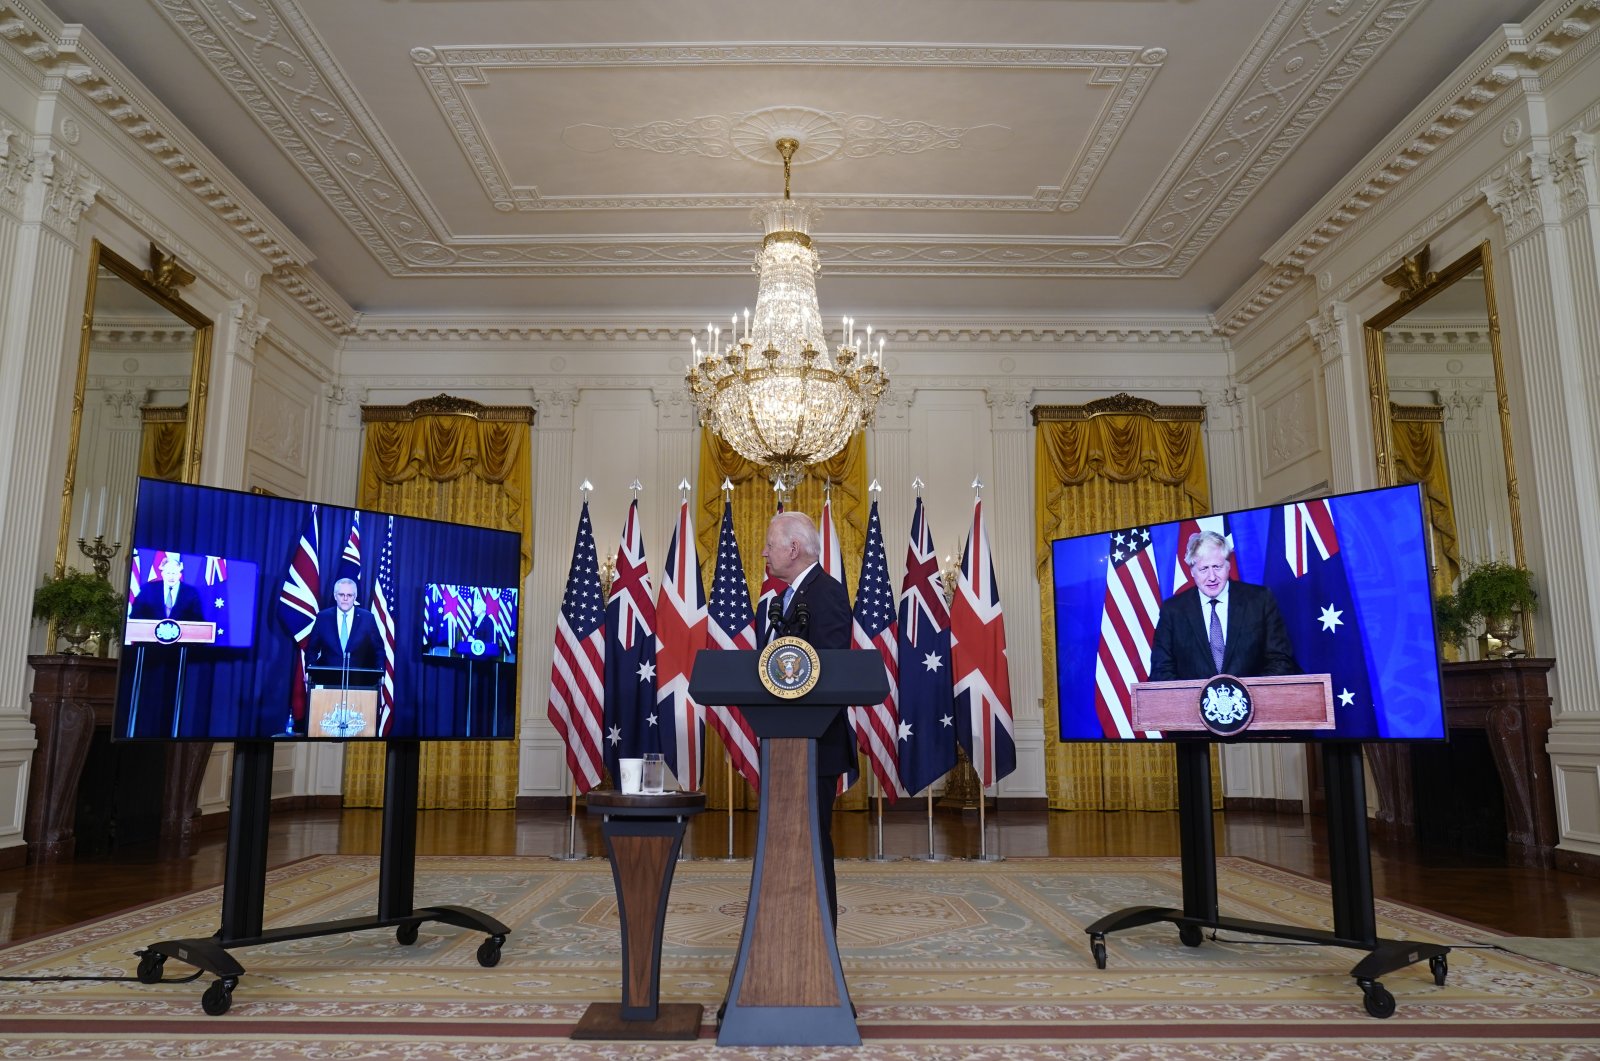 U.S. President Joe Biden, listens as he is joined virtually by Australian Prime Minister Scott Morrison, left, and British Prime Minister Boris Johnson, speaks about a national security initiative in the East Room of the White House in Washington, Wednesday, Sept. 15, 2021. (AP Photo)